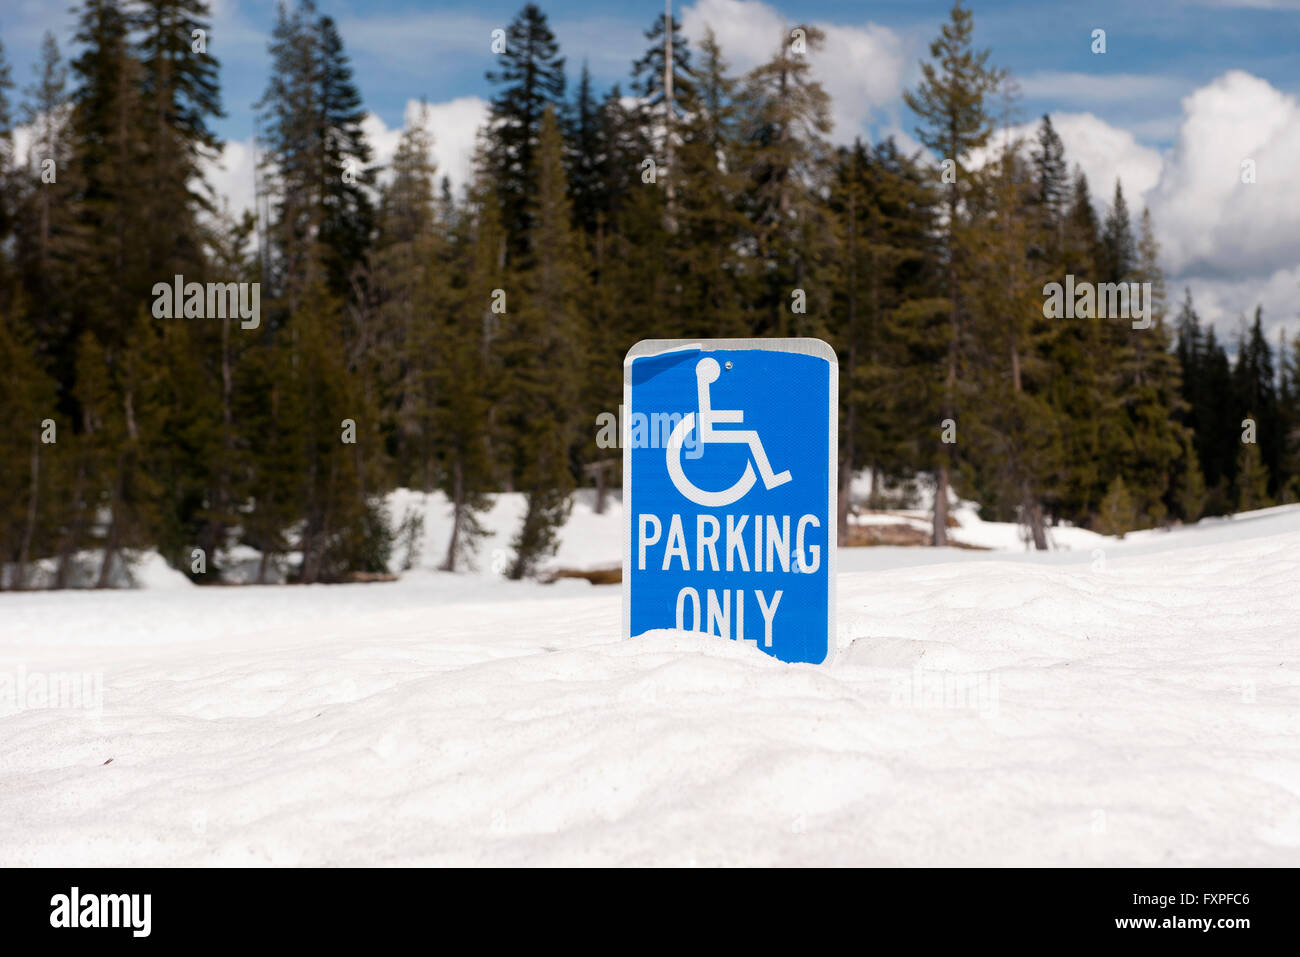 Handicapped parking sign half-buried in deep snow Stock Photo